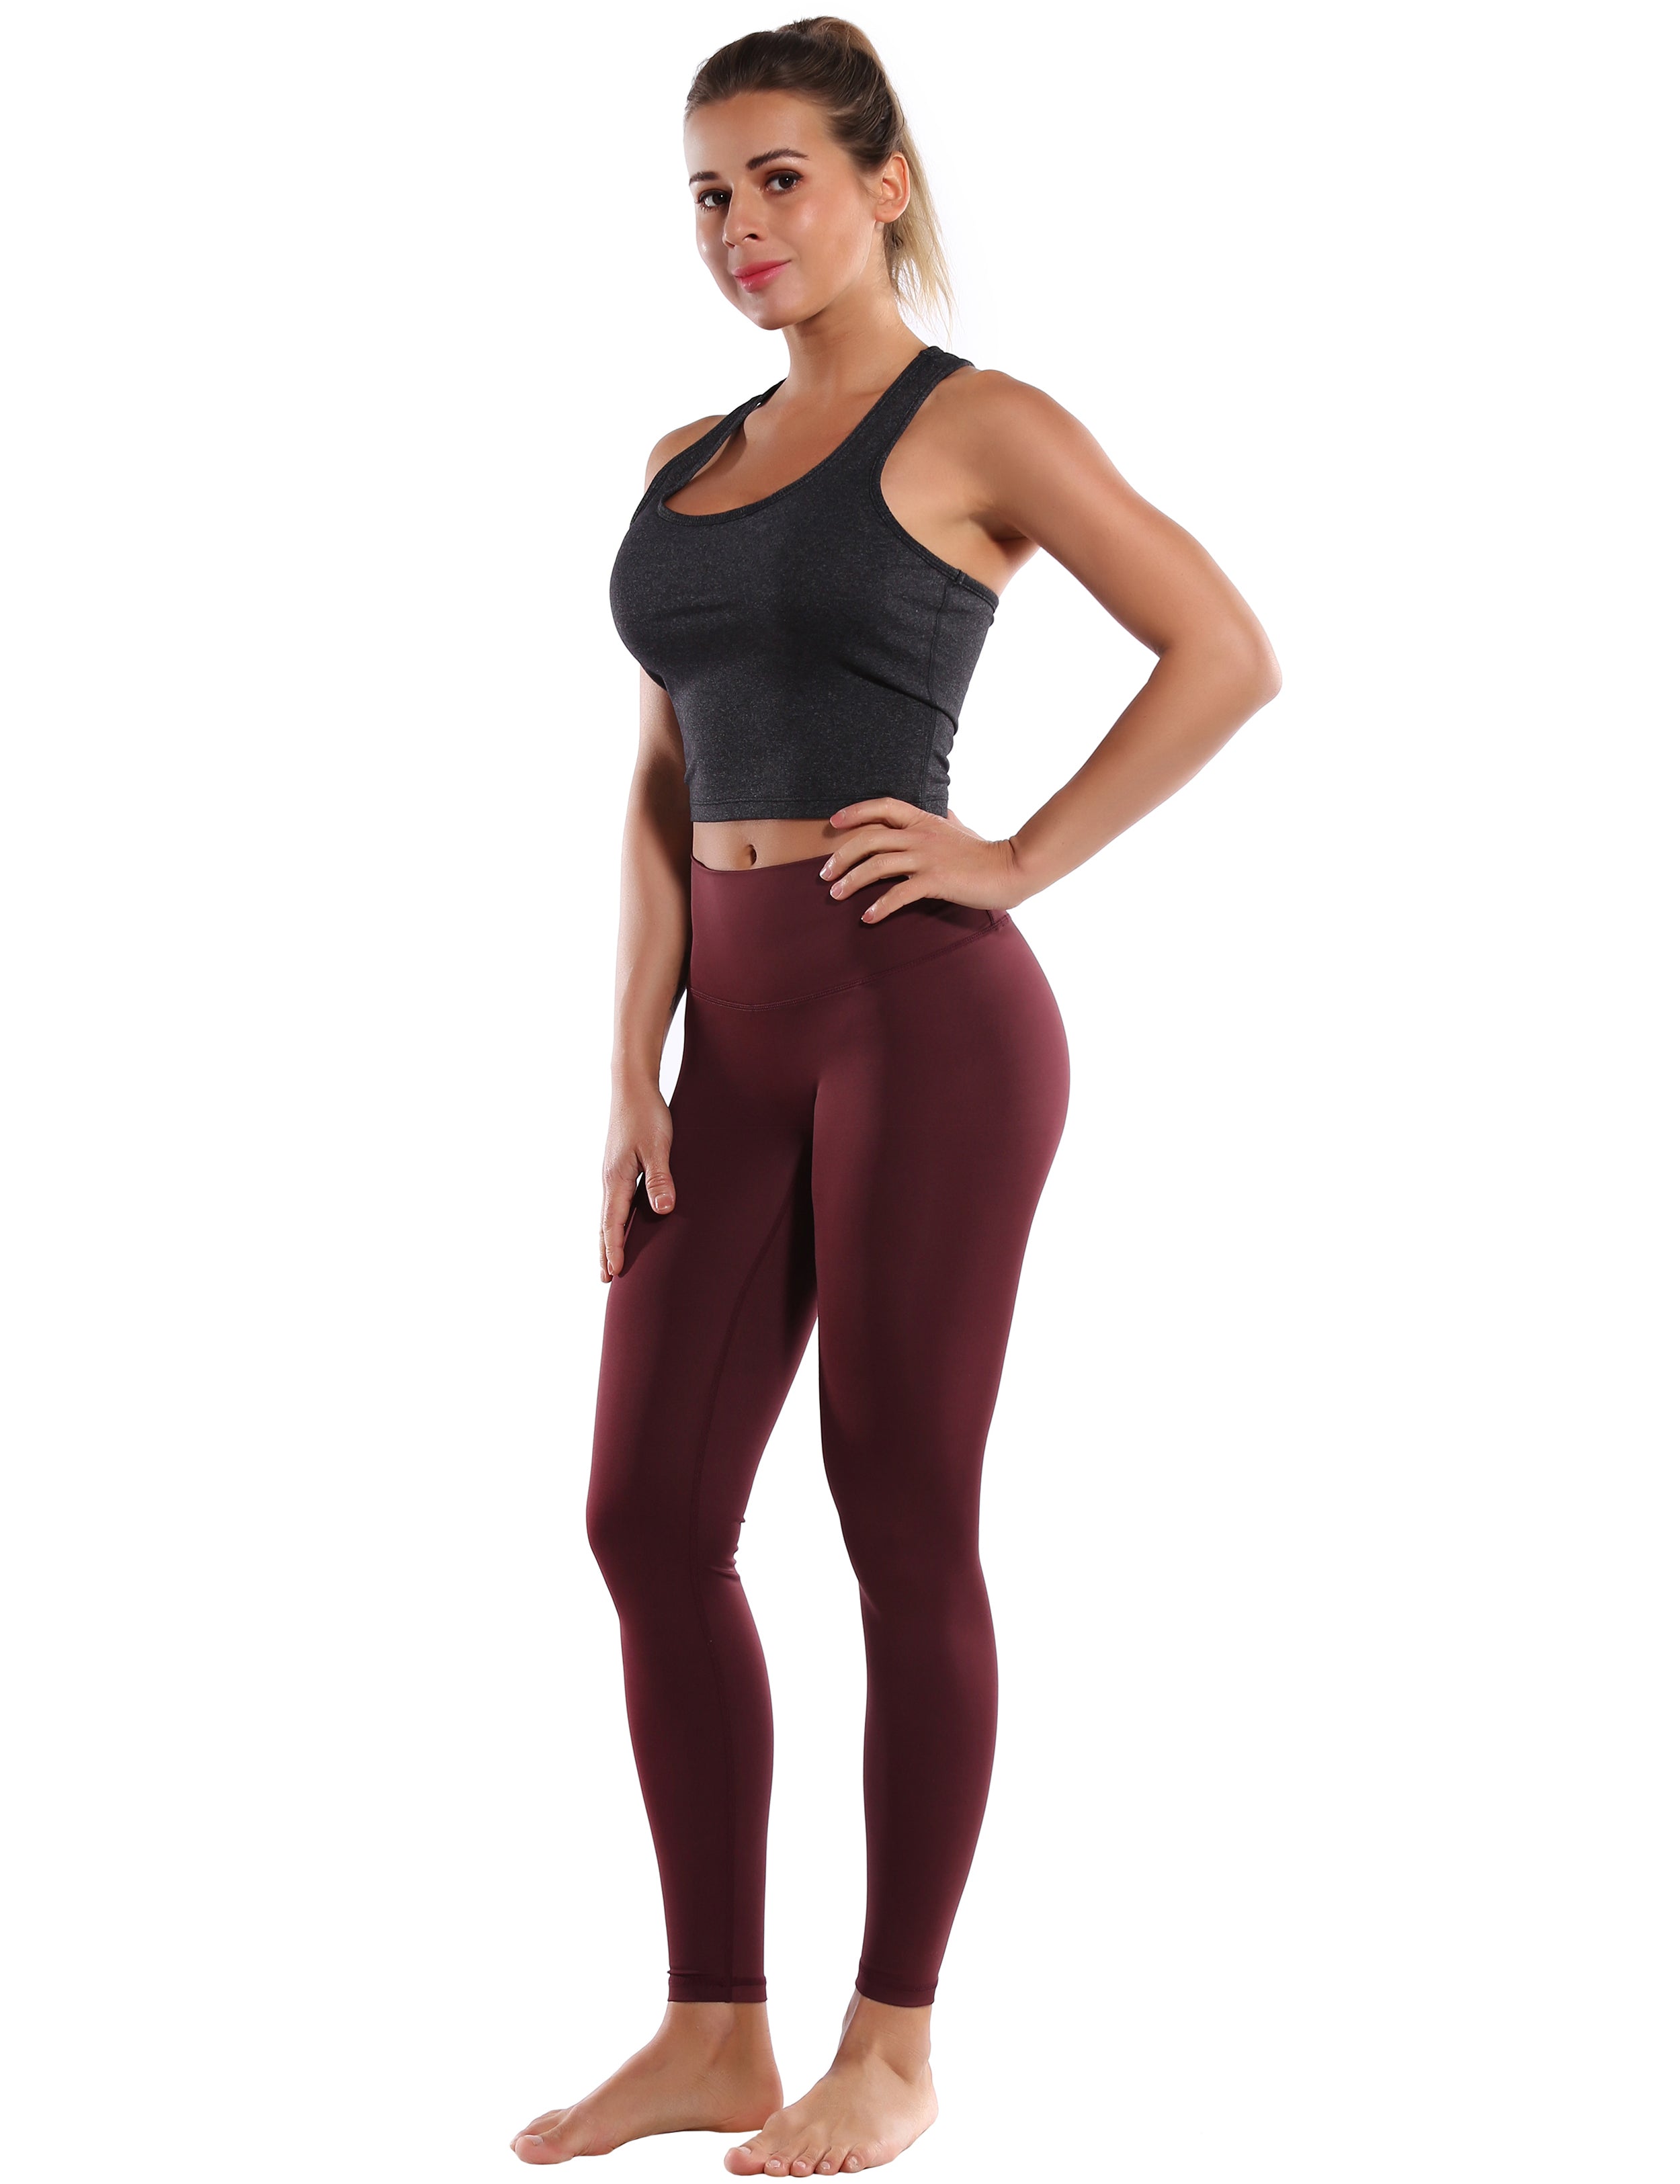 Racerback Athletic Crop Tank Tops heathercharcoal 92%Nylon/8%Spandex(Cotton Soft) Designed for Yoga Tight Fit So buttery soft, it feels weightless Sweat-wicking Four-way stretch Breathable Contours your body Sits below the waistband for moderate, everyday coverage